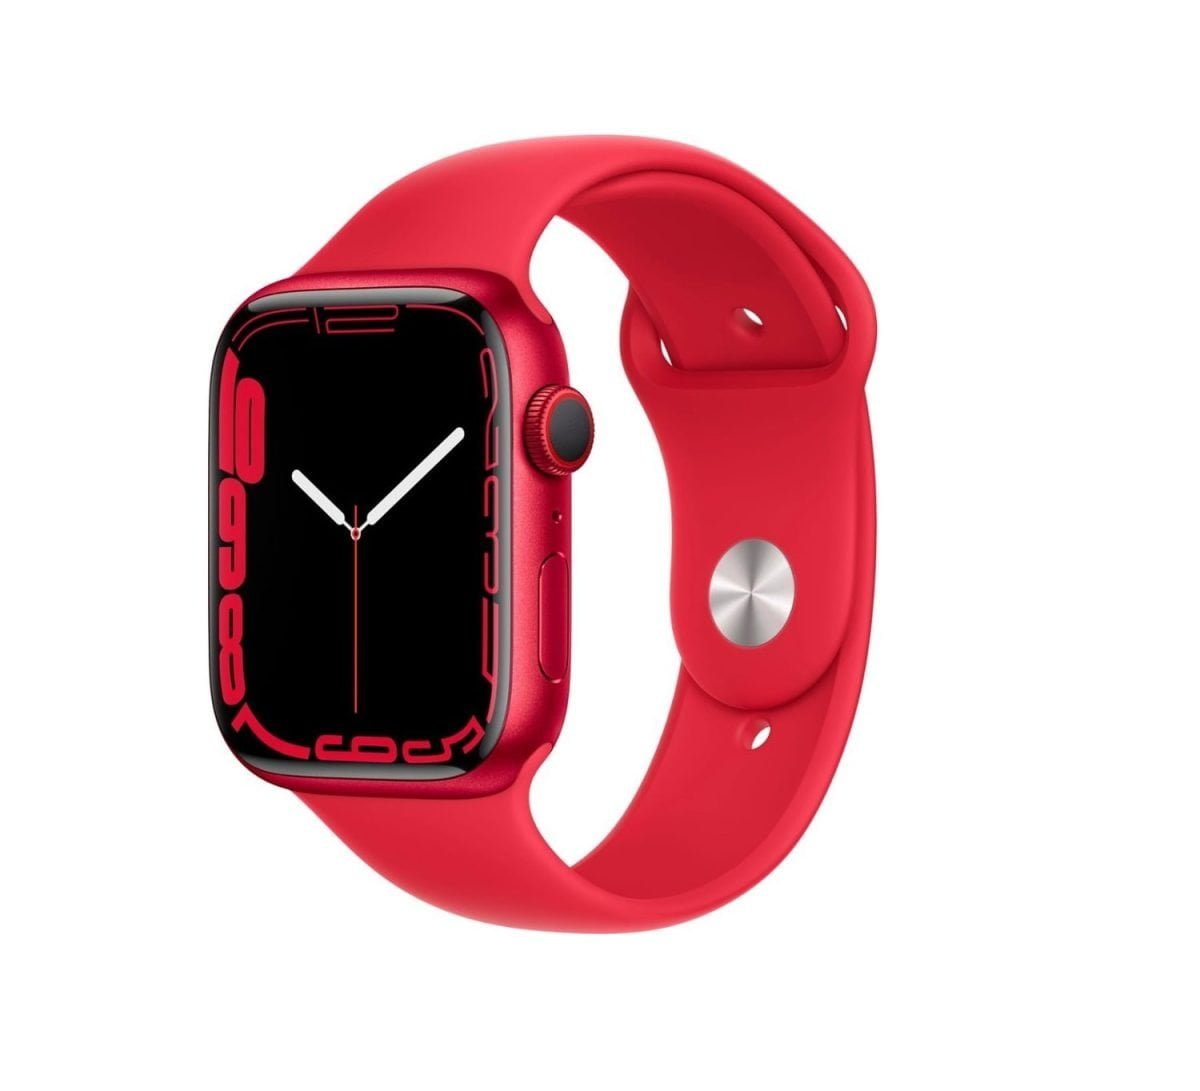 Apple &Amp;Lt;H1&Amp;Gt;Apple Watch Series 7 (Gps) 45Mm Aluminum Case With Sport Band - (Product Red)&Amp;Lt;/H1&Amp;Gt; &Amp;Lt;Div Class=&Amp;Quot;Long-Description-Container Body-Copy &Amp;Quot;&Amp;Gt; &Amp;Lt;Div Class=&Amp;Quot;Html-Fragment&Amp;Quot;&Amp;Gt; &Amp;Lt;Div&Amp;Gt; &Amp;Lt;Div&Amp;Gt;The Largest, Most Advanced Always-On Retina Display Yet Makes Everything You Do With Your Apple Watch Series 7 Bigger And Better. Series 7 Is The Most Durable Apple Watch Ever Built, With An Even More Crack-Resistant Front Crystal. Advanced Features Let You Measure Your Blood Oxygen Level,¹ Take An Ecg Anytime, And Access Mindfulness And Sleep Tracking Apps. You Can Also Track Dozens Of Workouts, Including New Tai Chi And Pilates.&Amp;Lt;/Div&Amp;Gt; &Amp;Lt;/Div&Amp;Gt; &Amp;Lt;/Div&Amp;Gt; &Amp;Lt;/Div&Amp;Gt; Apple Watch Series 7 Apple Watch Series 7 (Gps) 45Mm Aluminum Case With Sport Band - (Product Red)